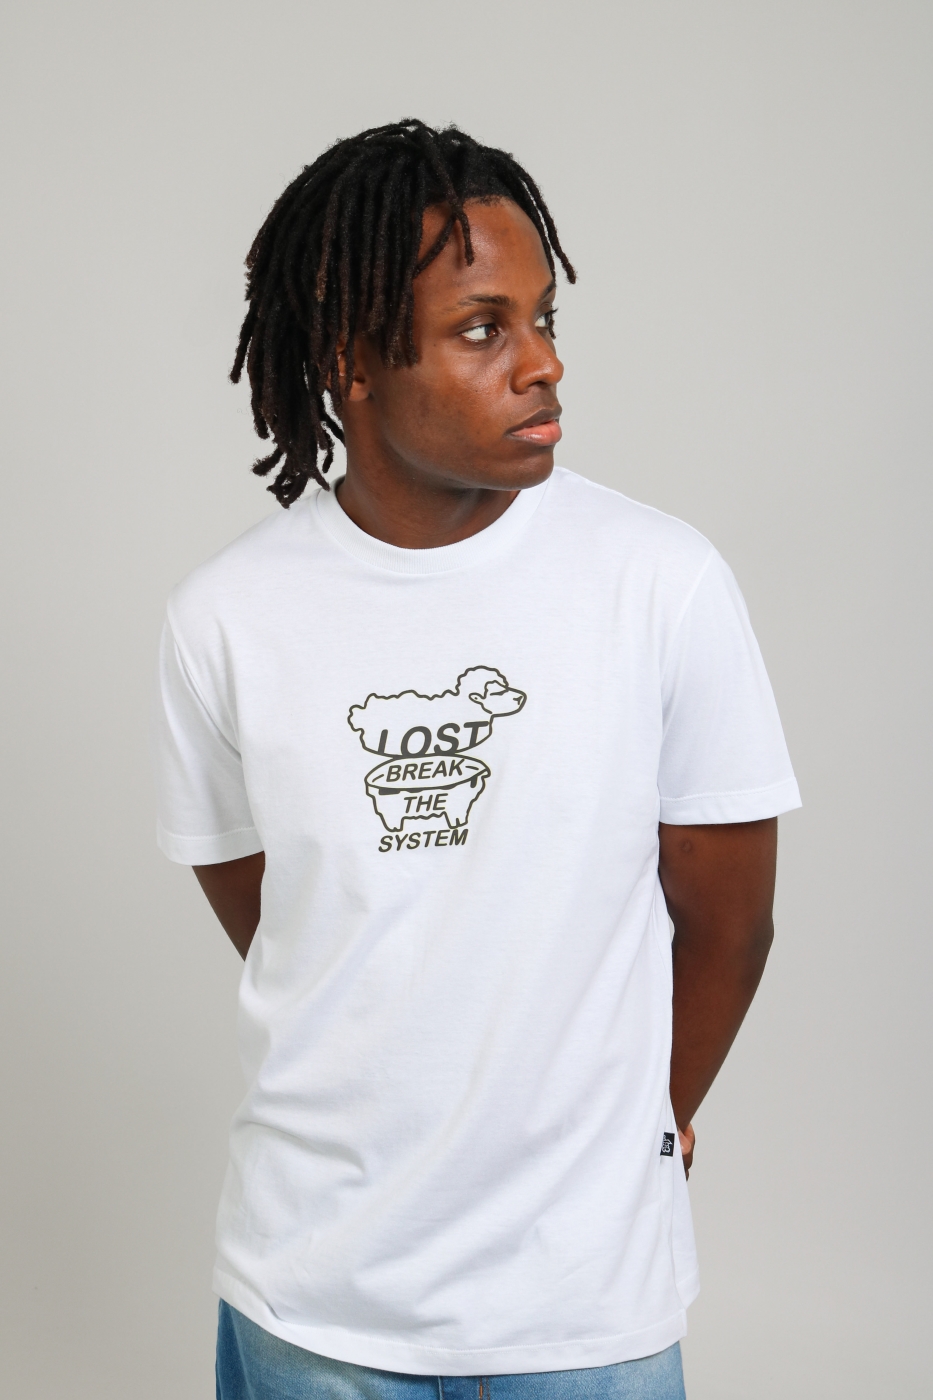 T-shirt Sheep Break The System Lost